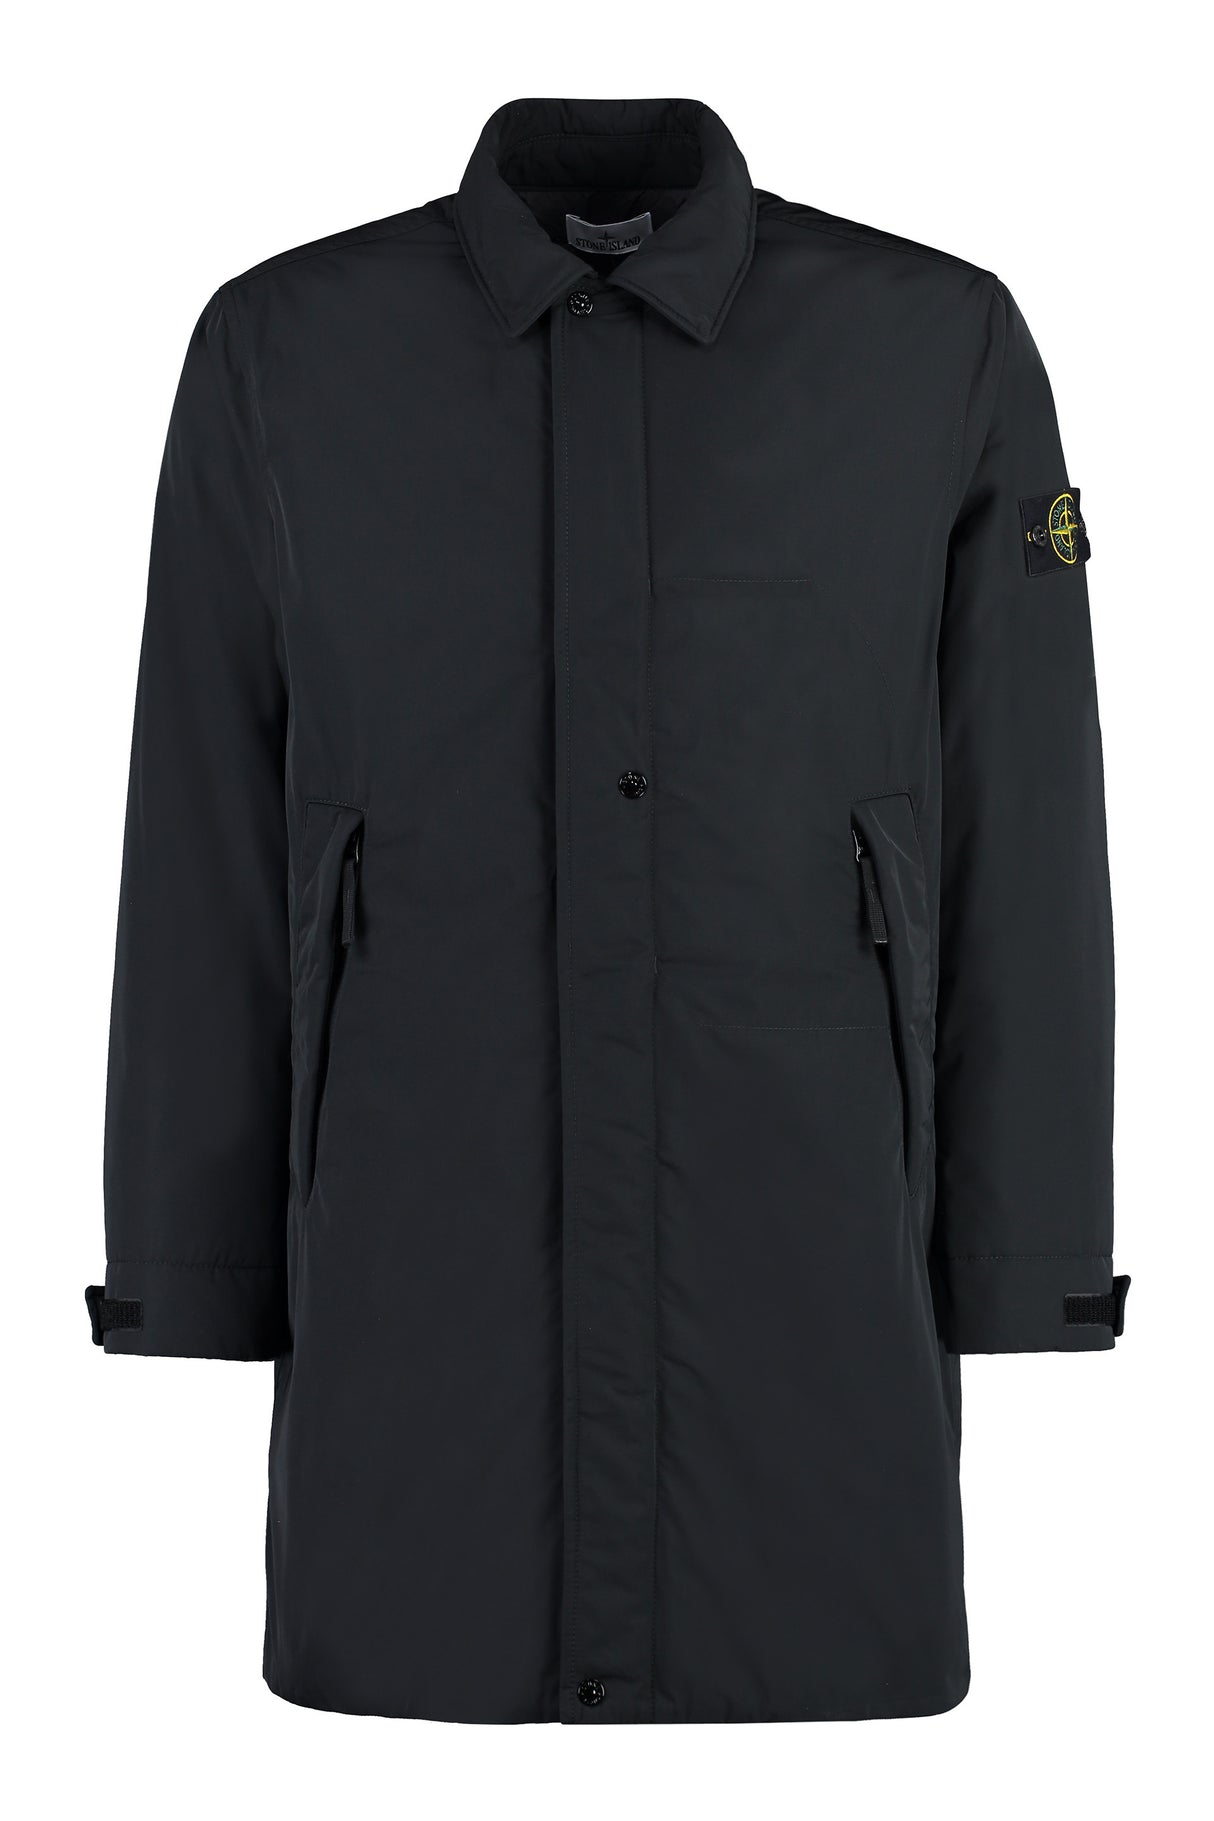 Men's Black Parka Jacket with Classic Collar and Removable Logo Patch